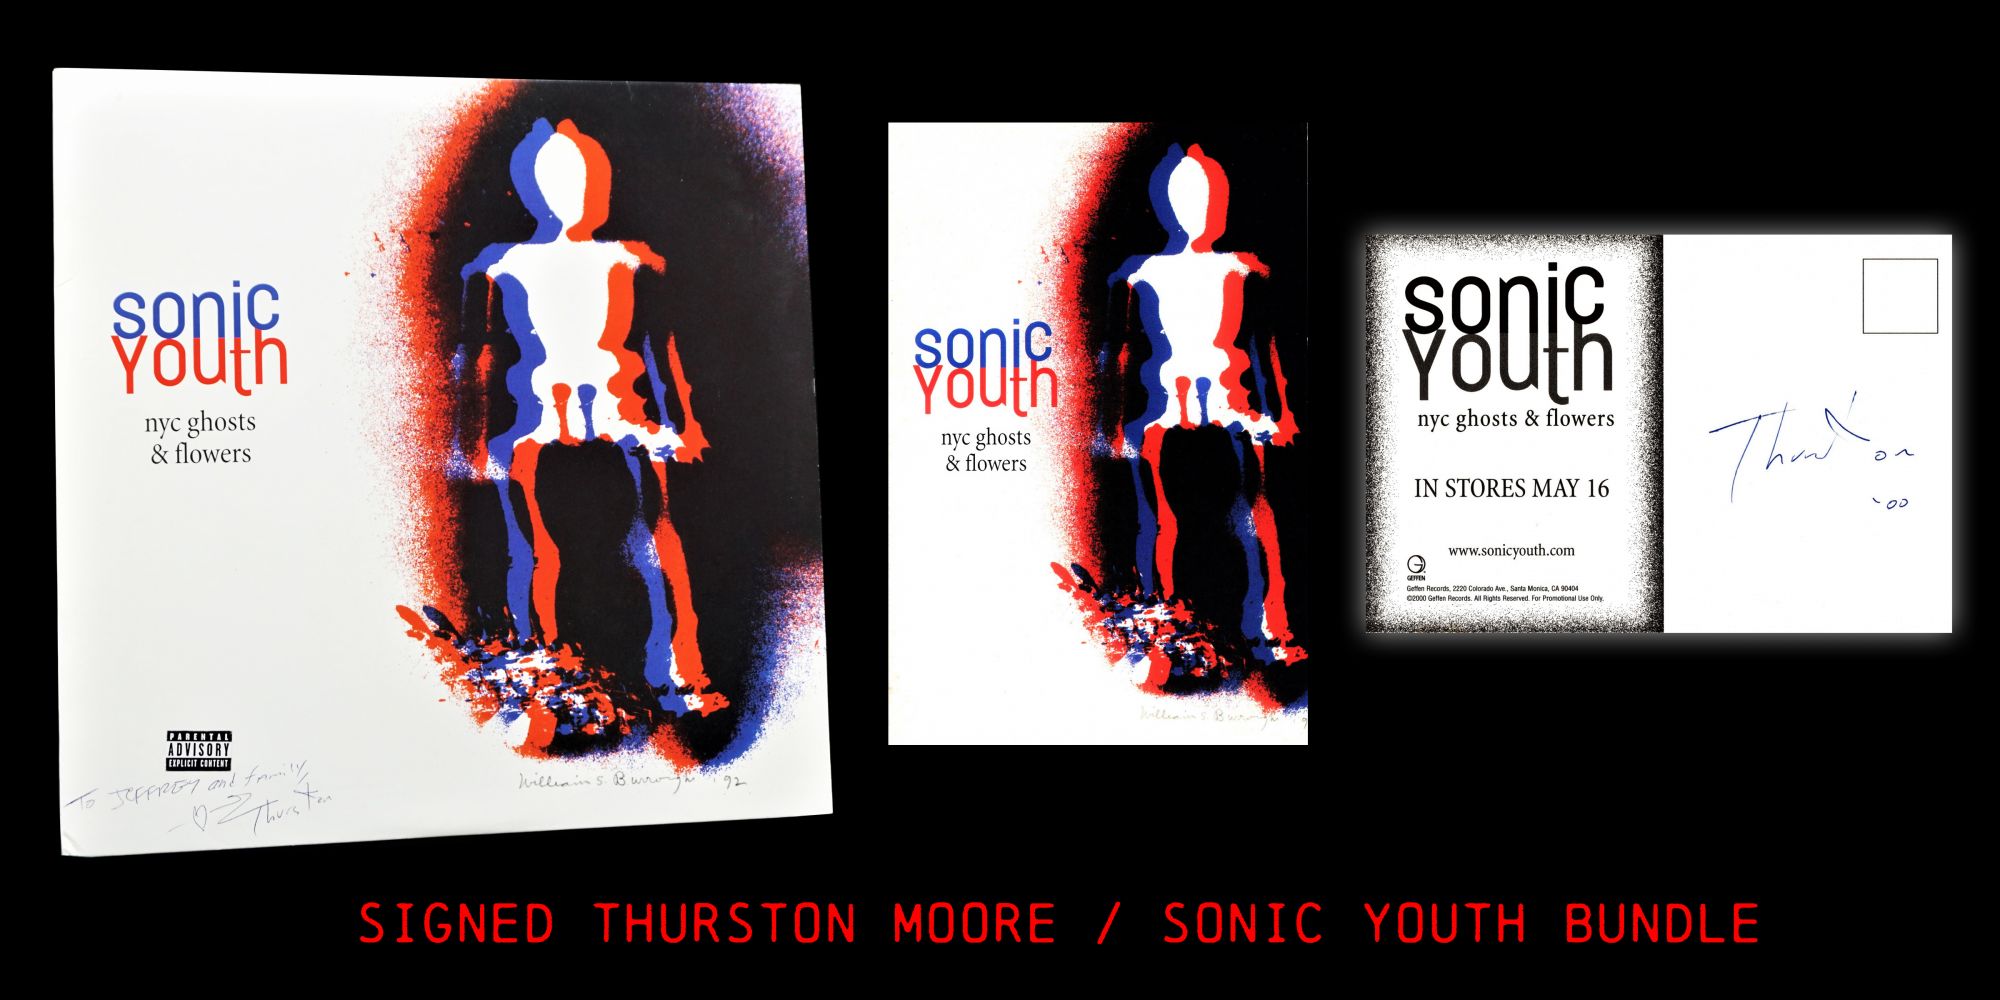 Sonic Youth Ghosts & Flowers LP Record with: Postcard by William S.  Burroughs, Thurston Moore on Third Mind Books